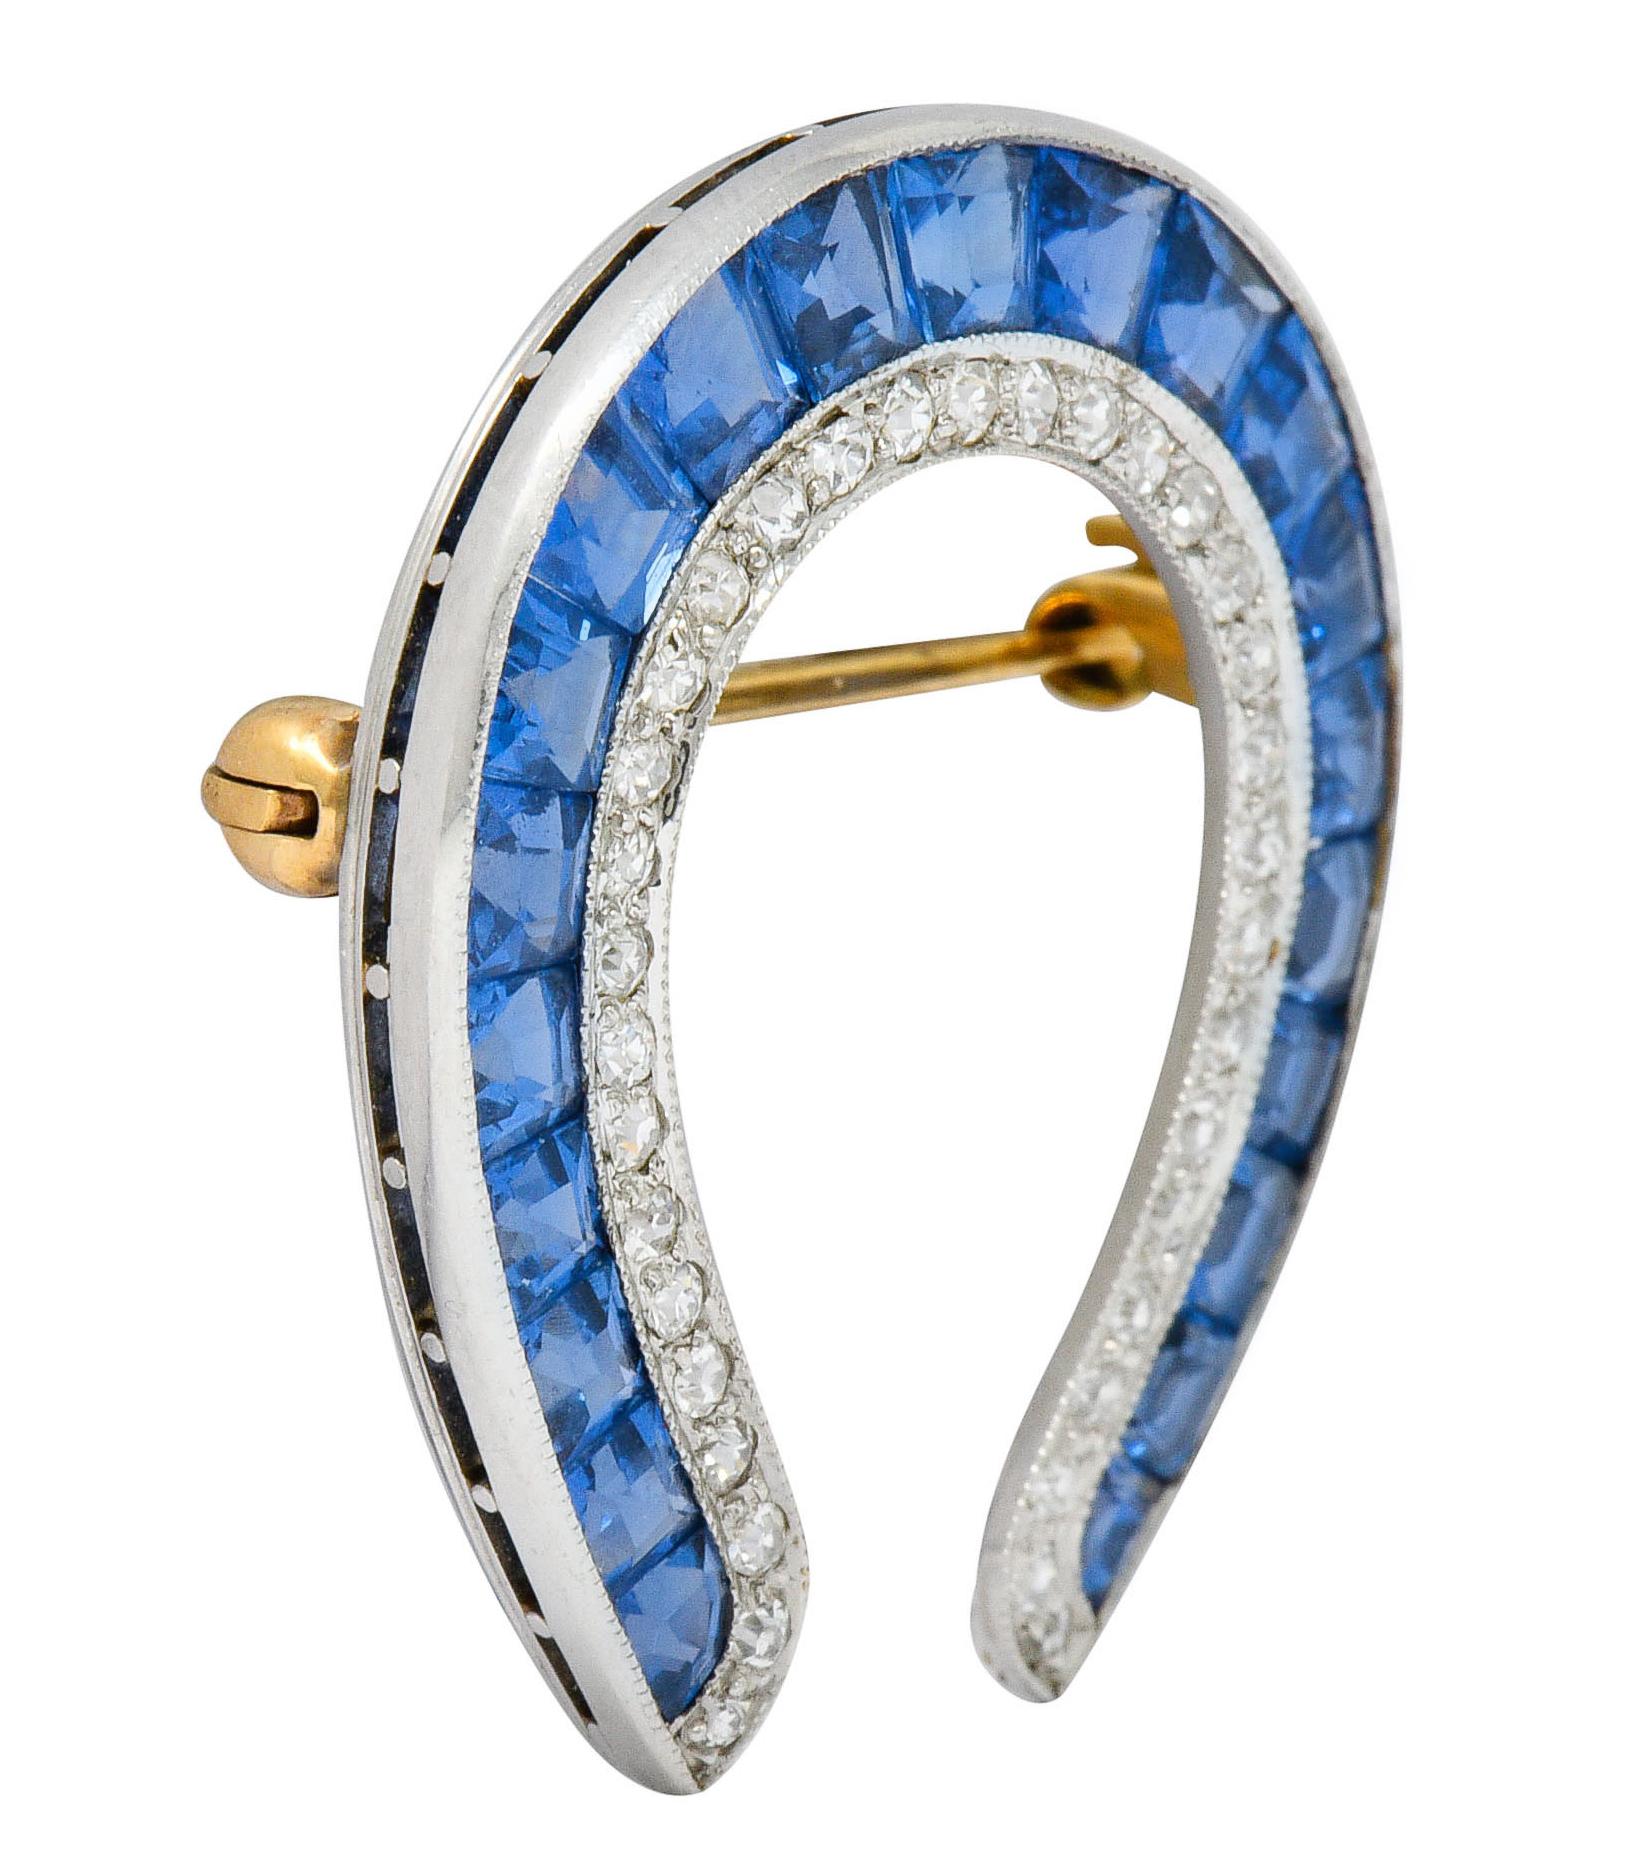 Brooch is designed as a horseshoe channel set with calibrè cut sapphire

Sapphires are very well-matched light violetish-blue color

Accented by single cut diamonds weighing approximately 0.50 carat; eye-clean and white

Completed by 14 karat gold